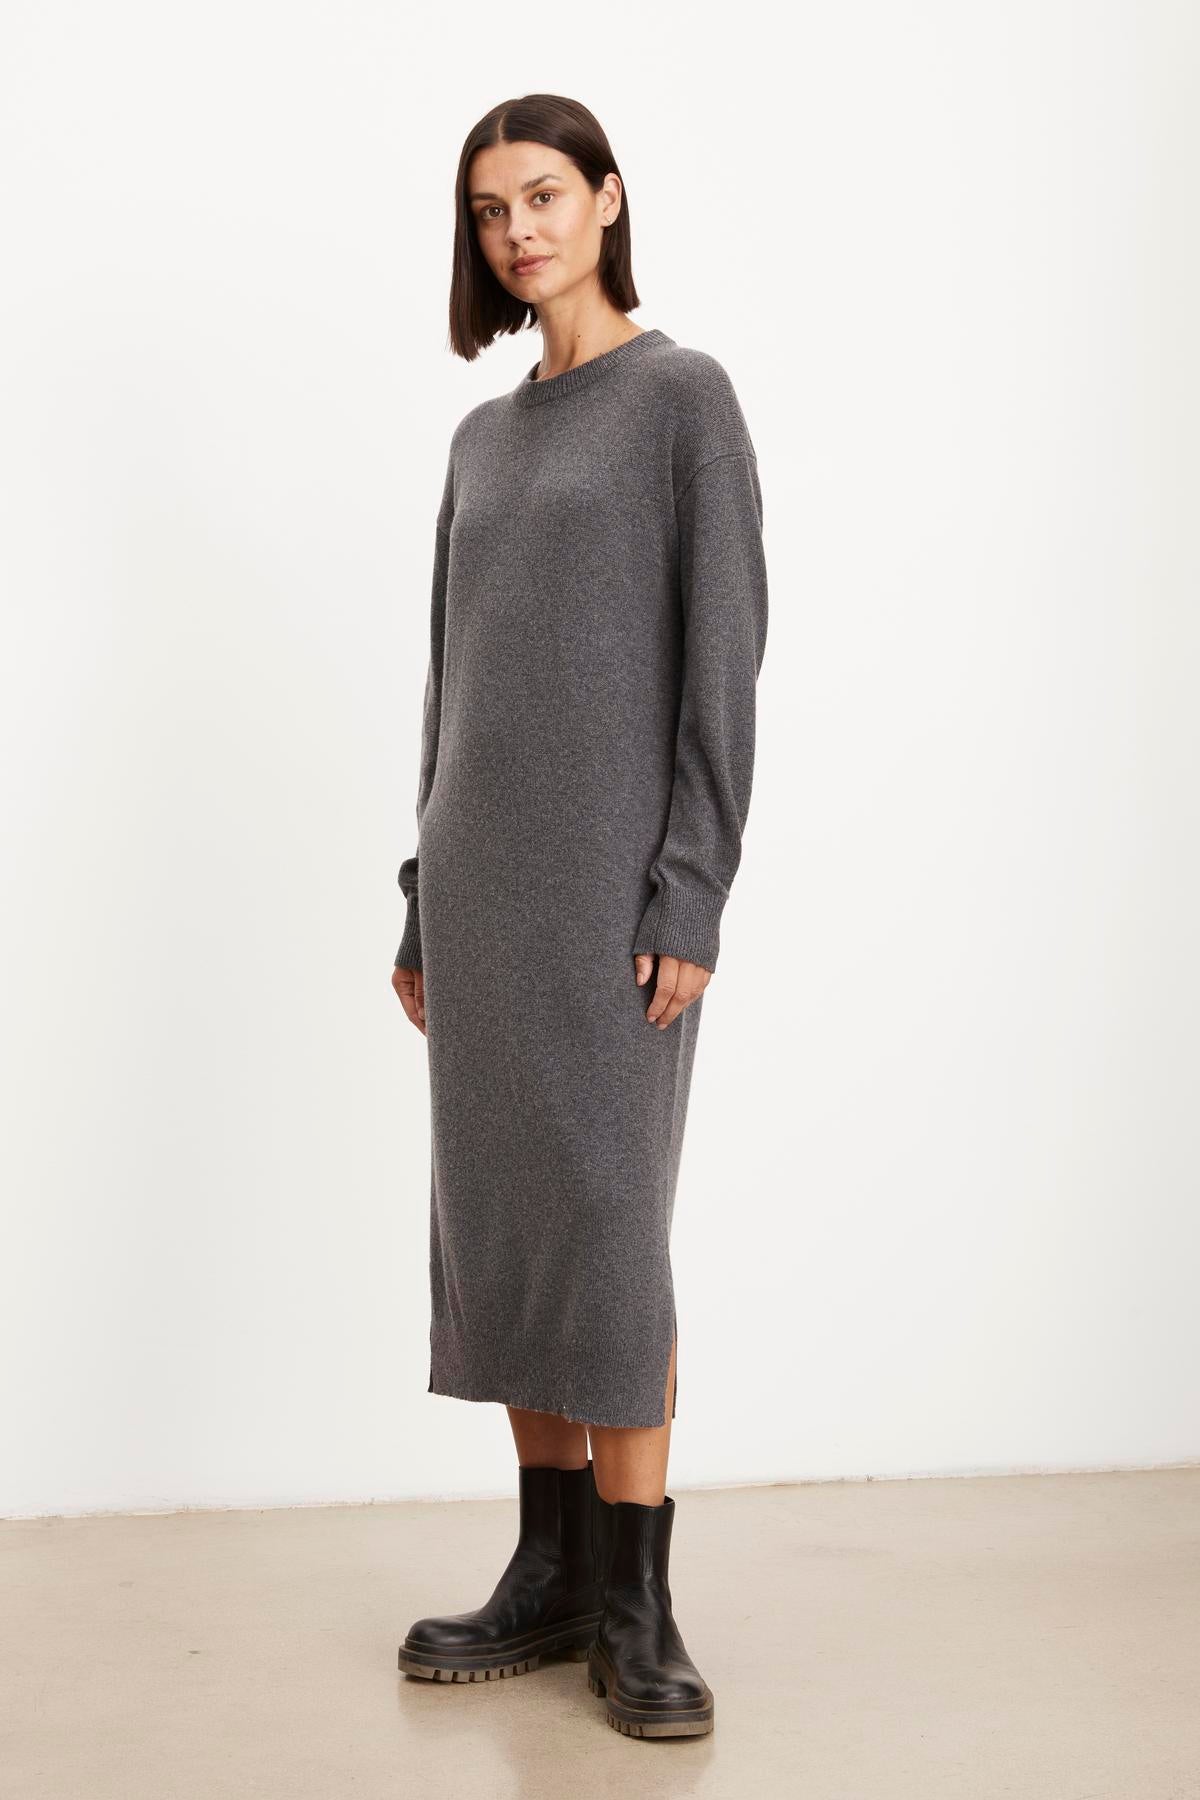   A woman stands wearing a long gray KADEN SWEATER DRESS by Velvet by Graham & Spencer with a side split hem and black combat boots, posing with her hands slightly tucked into the dress sides, against a plain white background. 